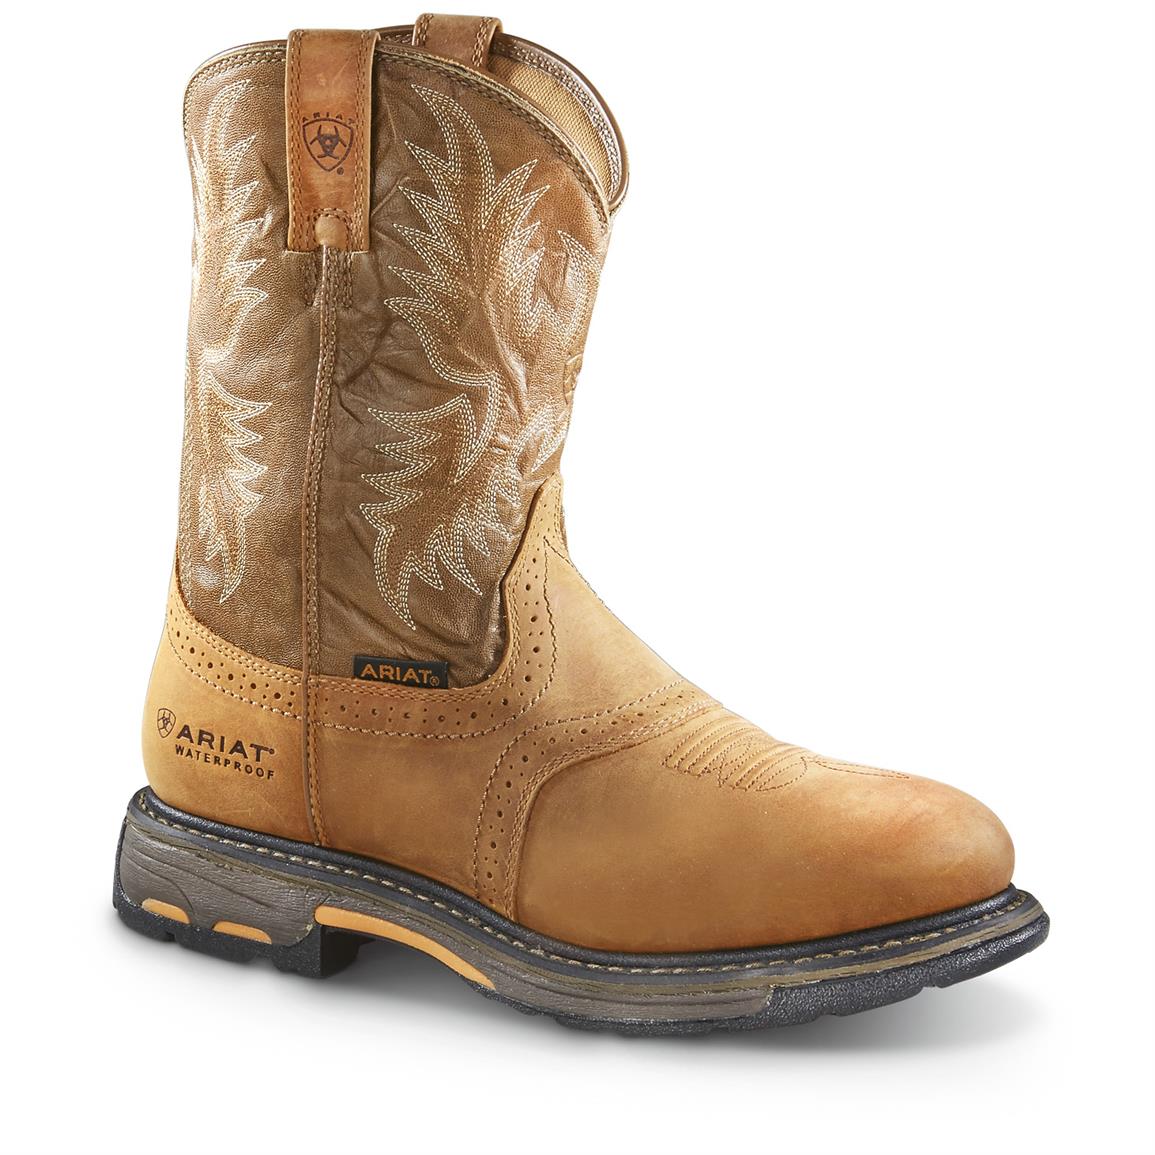 Ariat Army Boots - Army Military